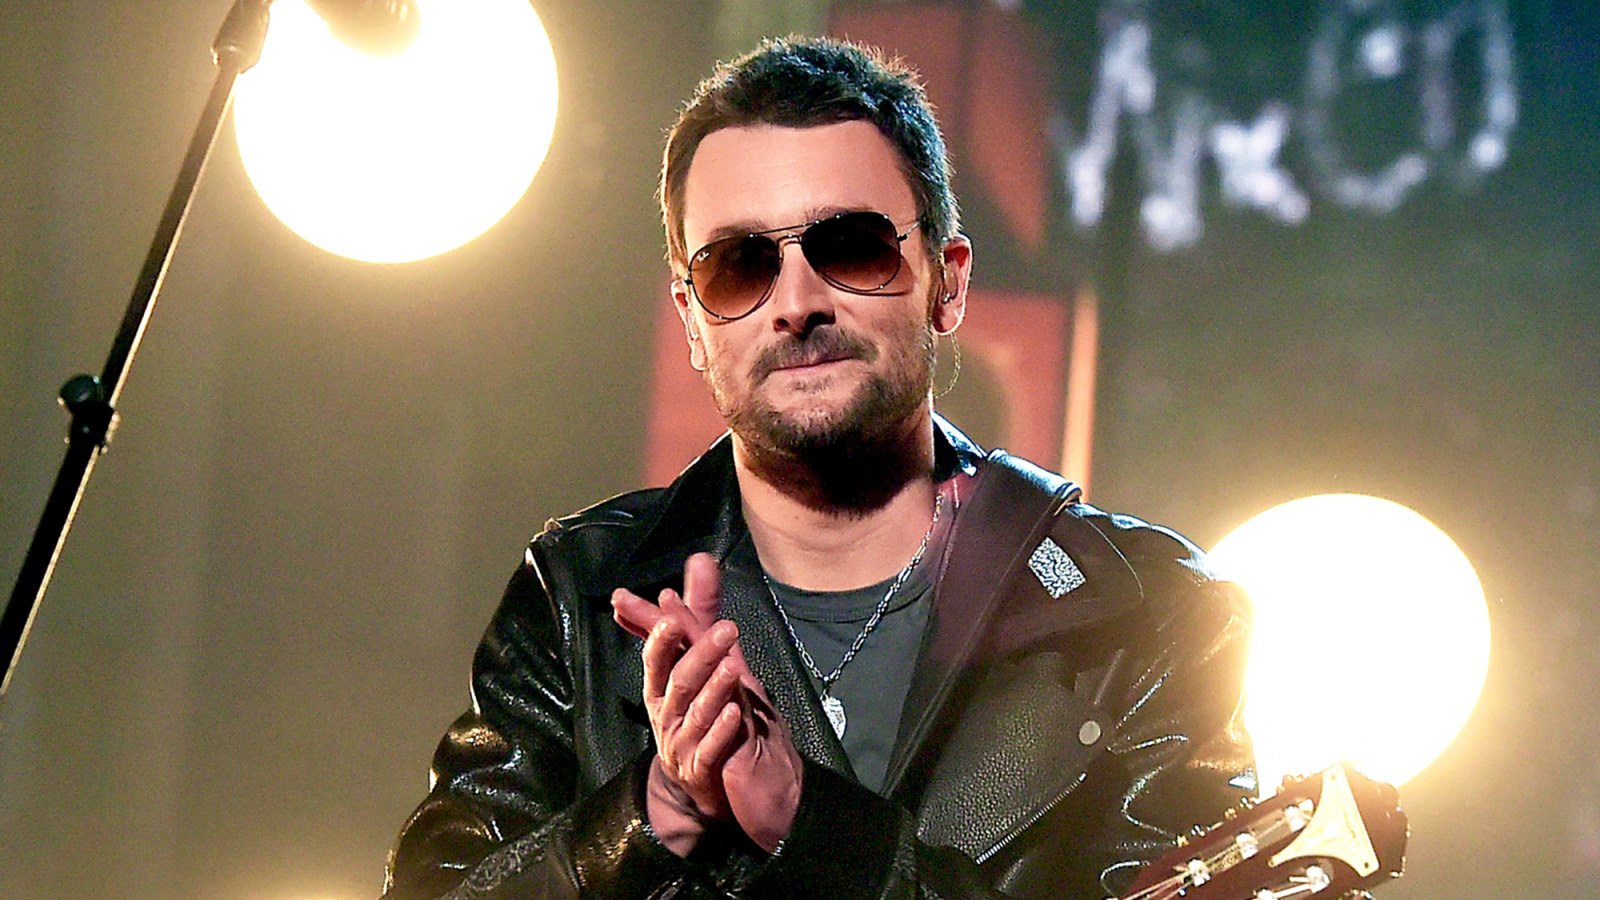 Eric Church performs onstage during the 51st Academy of Country Music Awards at MGM Grand Garden Arena in Las Vegas, Nevada.